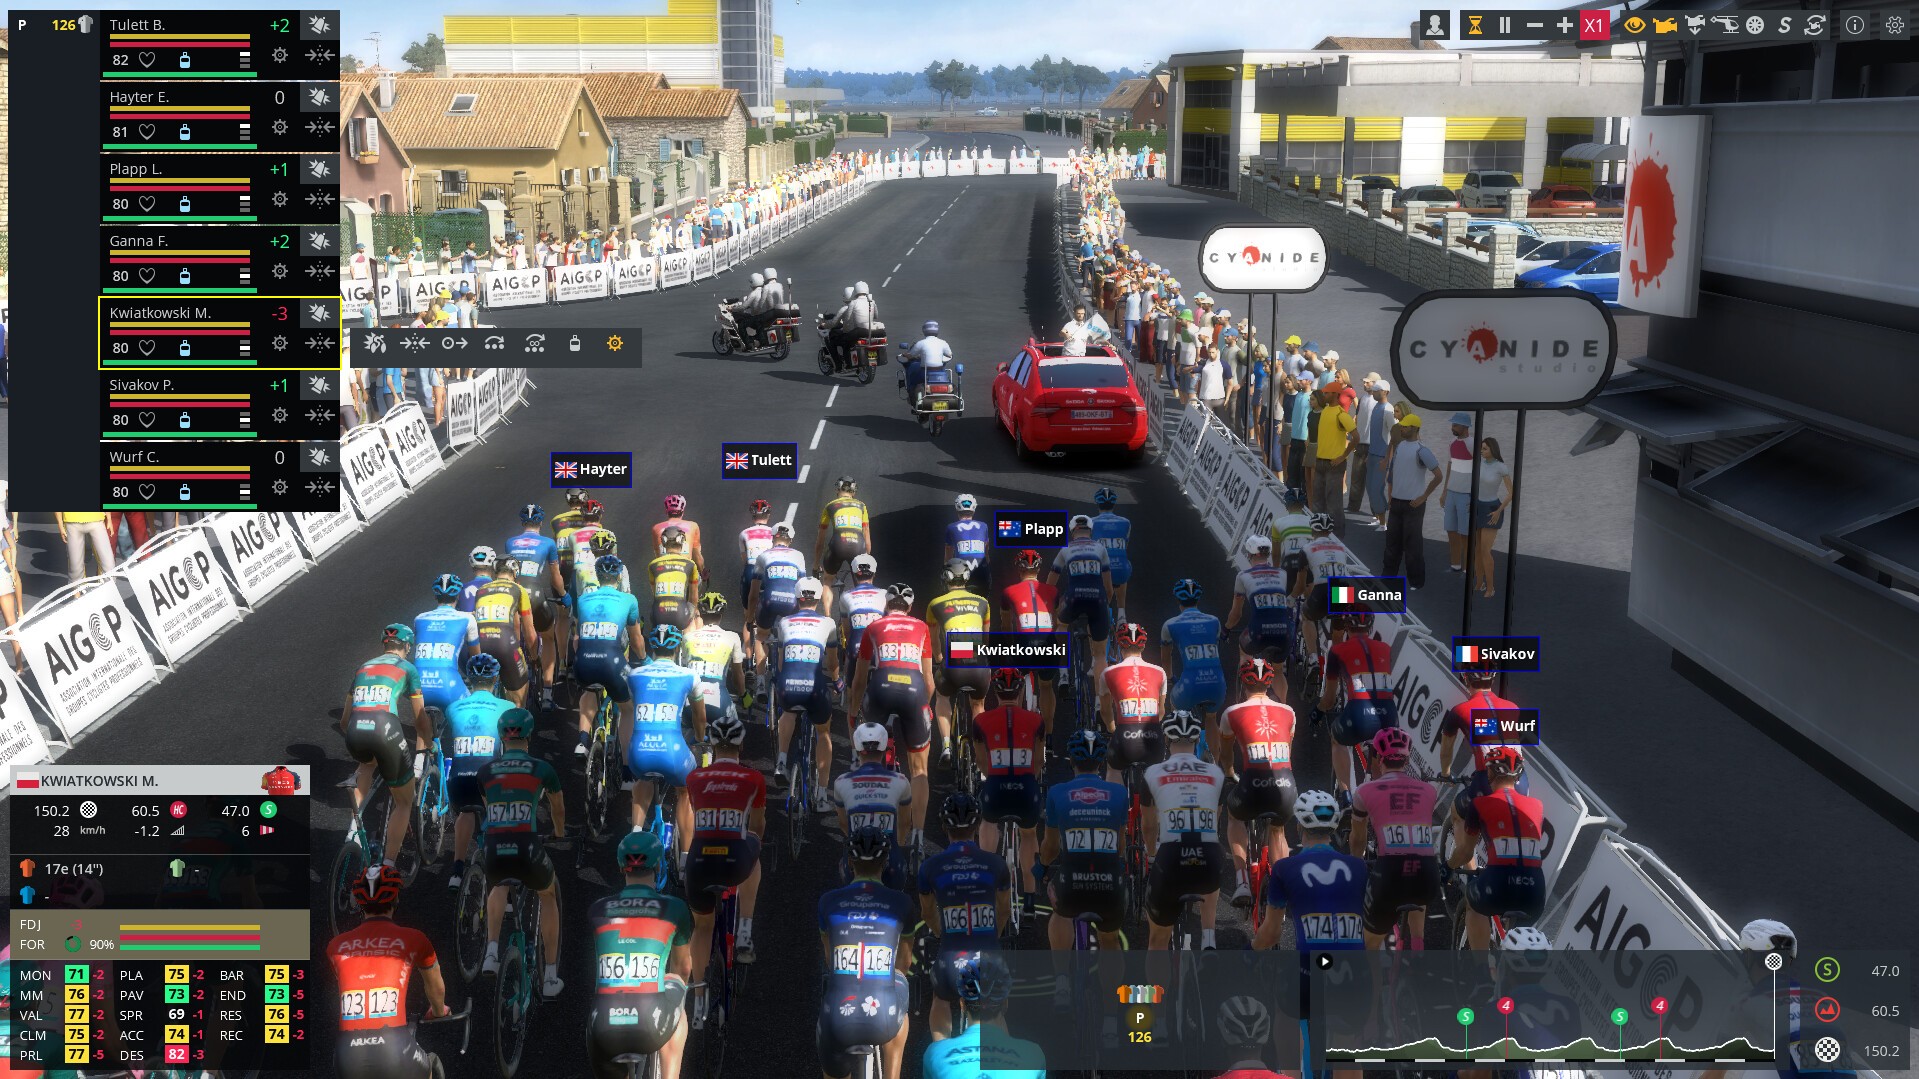 Live Cycling Manager 2023 on Steam